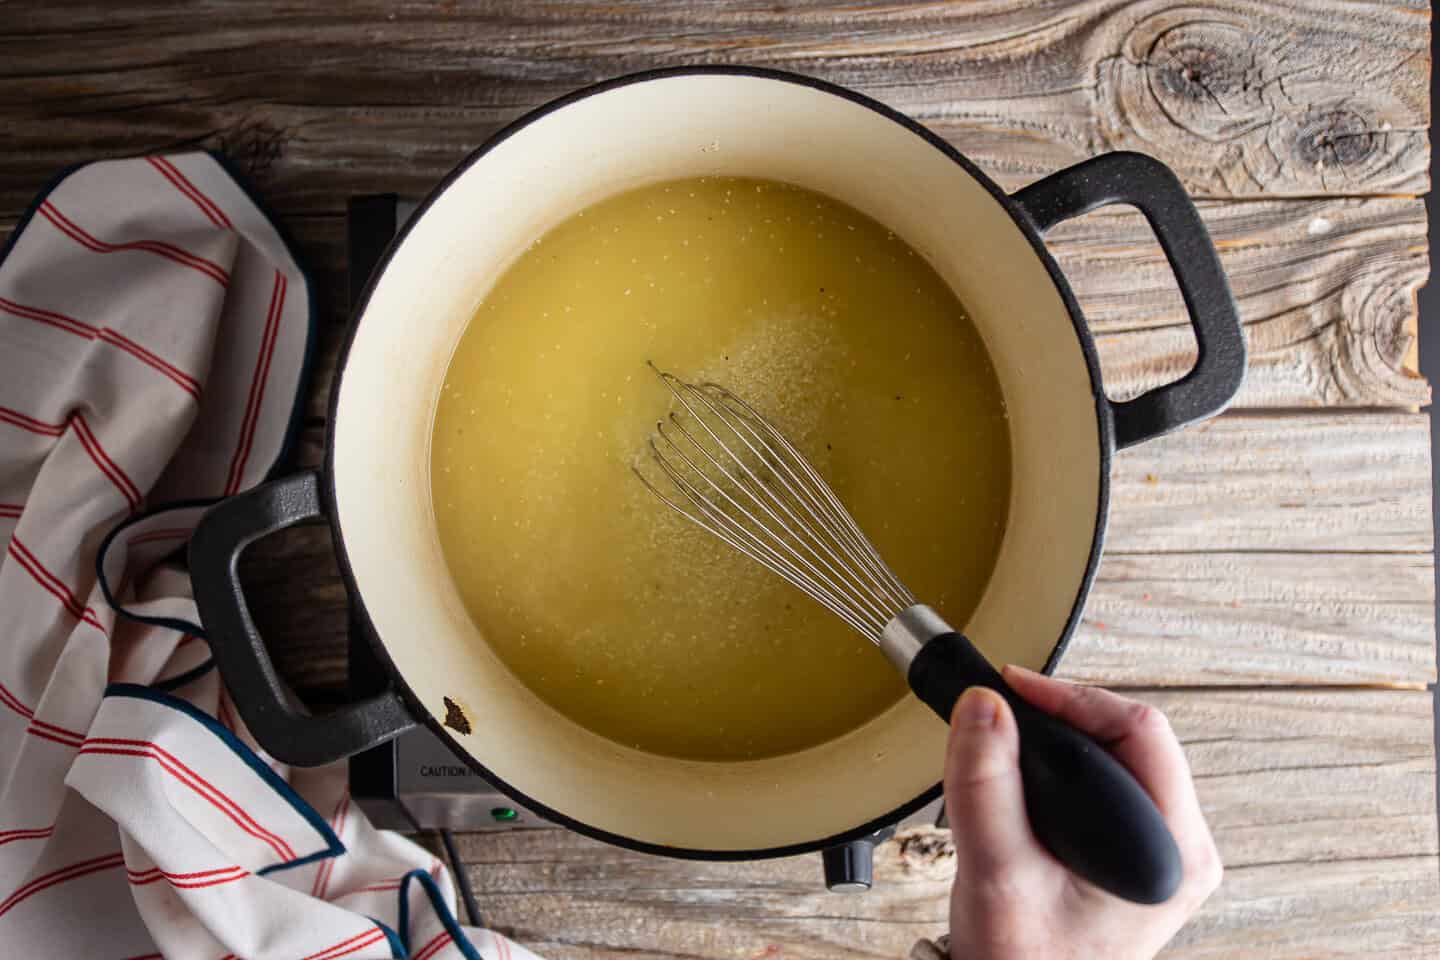 Whisking grits into boiling chicken stock.